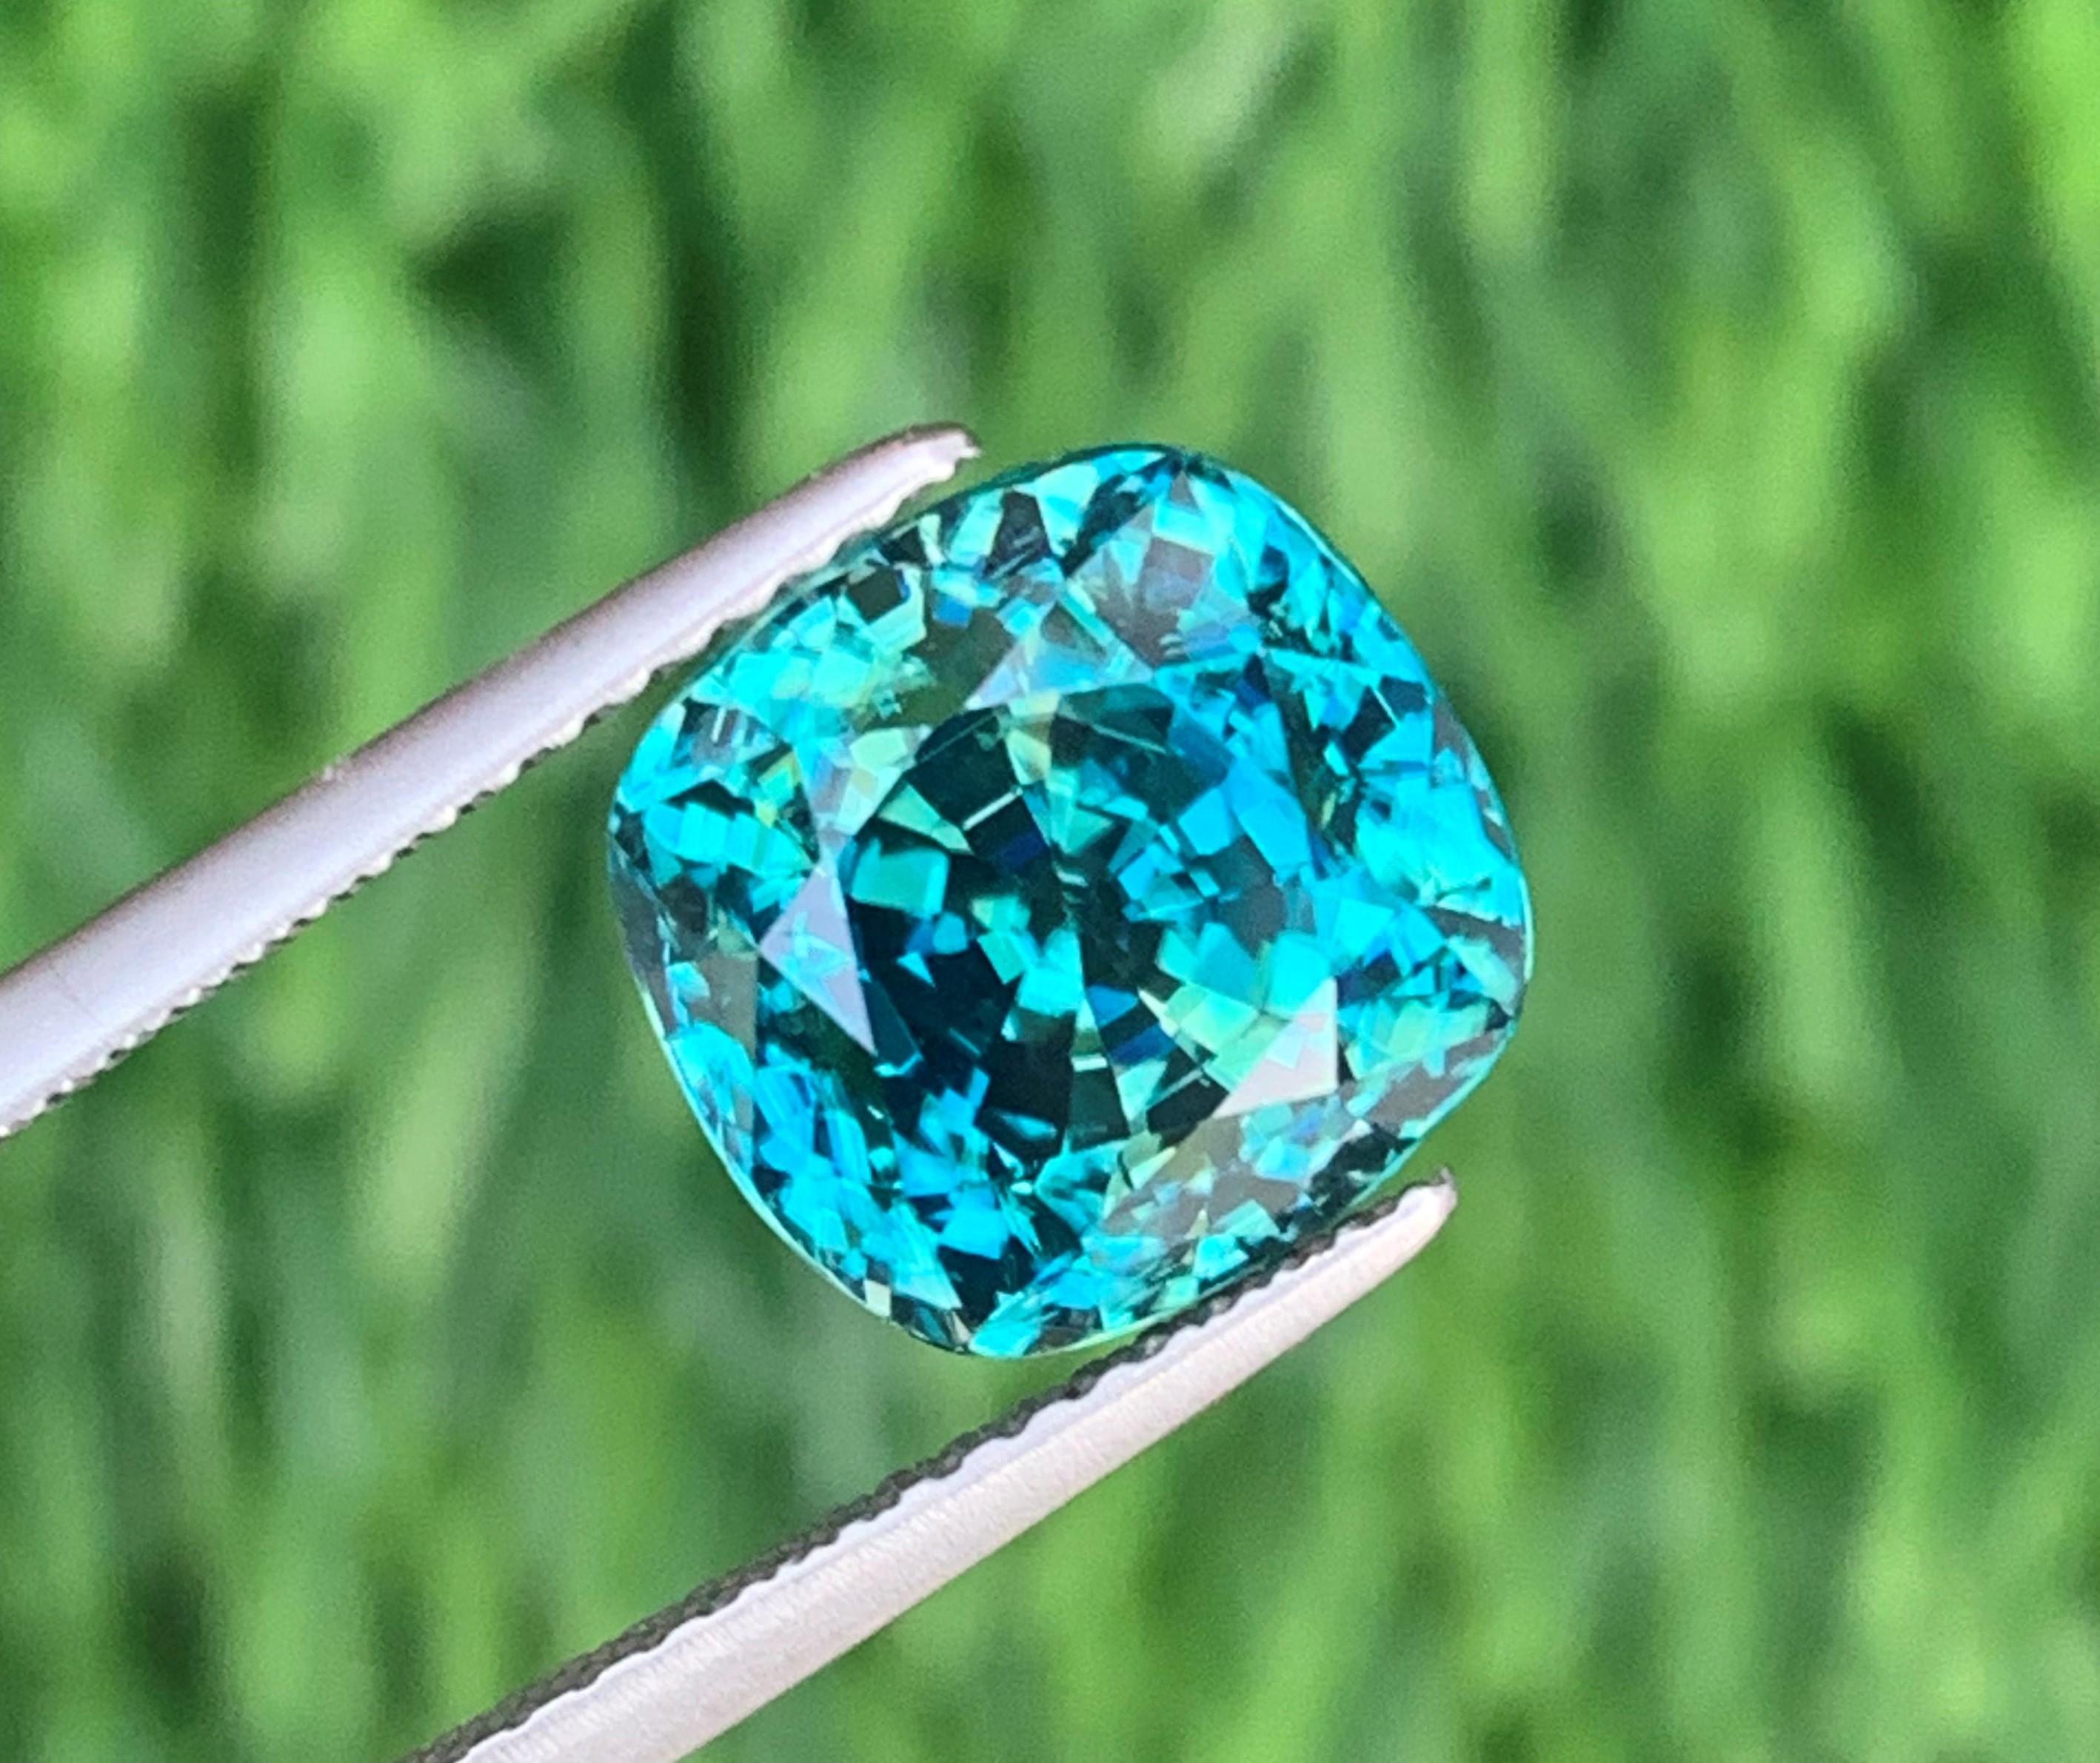 Faceted Zircon
Weight: 8.55 Carats
Dimension: 9.5x9.1x8.7 Mm
Origin: Cambodia
Shape: Cushion
Color: Blue
Certificate: On Demand
Blue zircon, in particular, is the alternative birthstone for December. Color differences in zircon are caused by